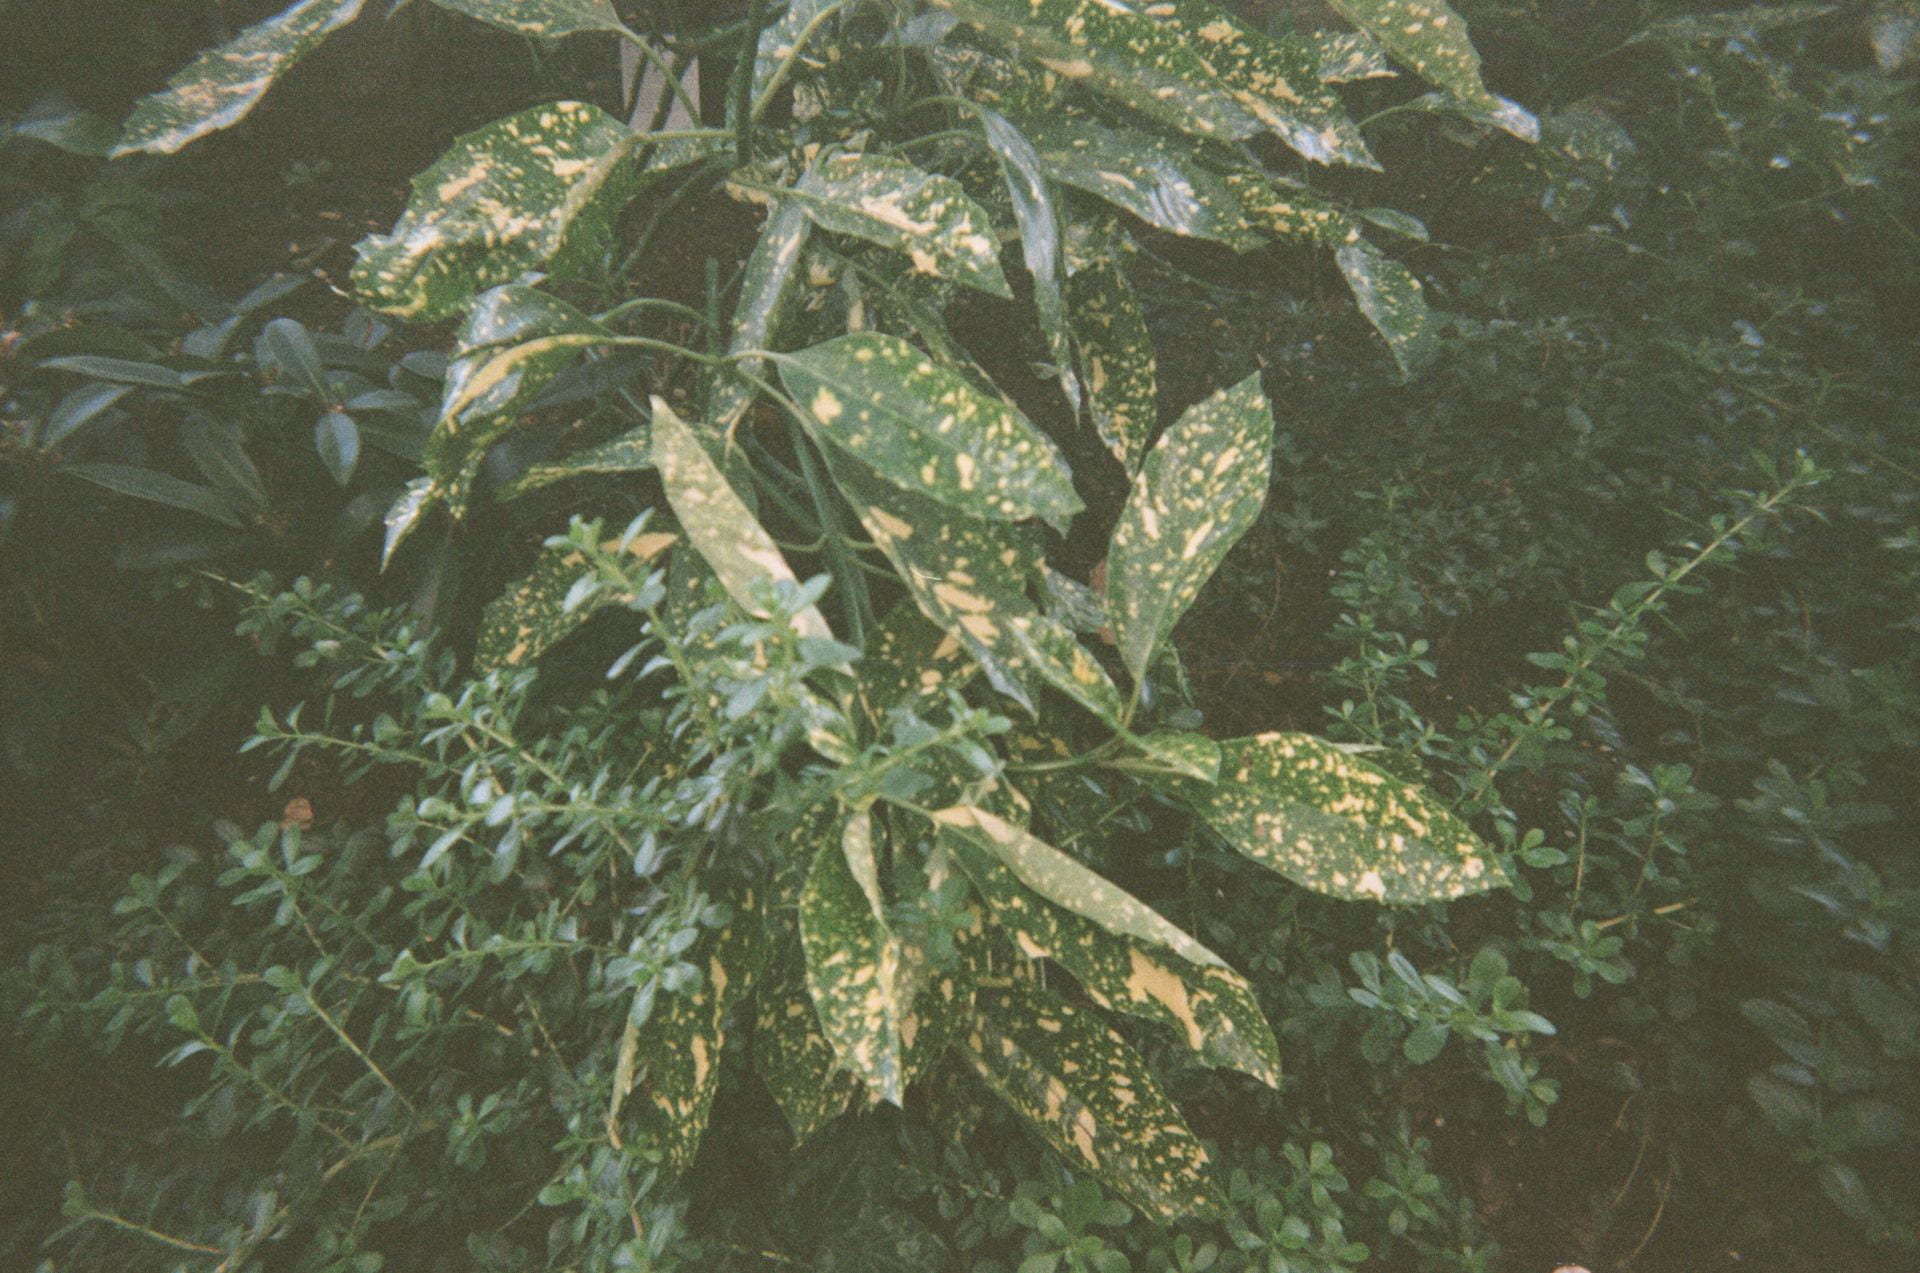 an image of some yellow speckled leaves.